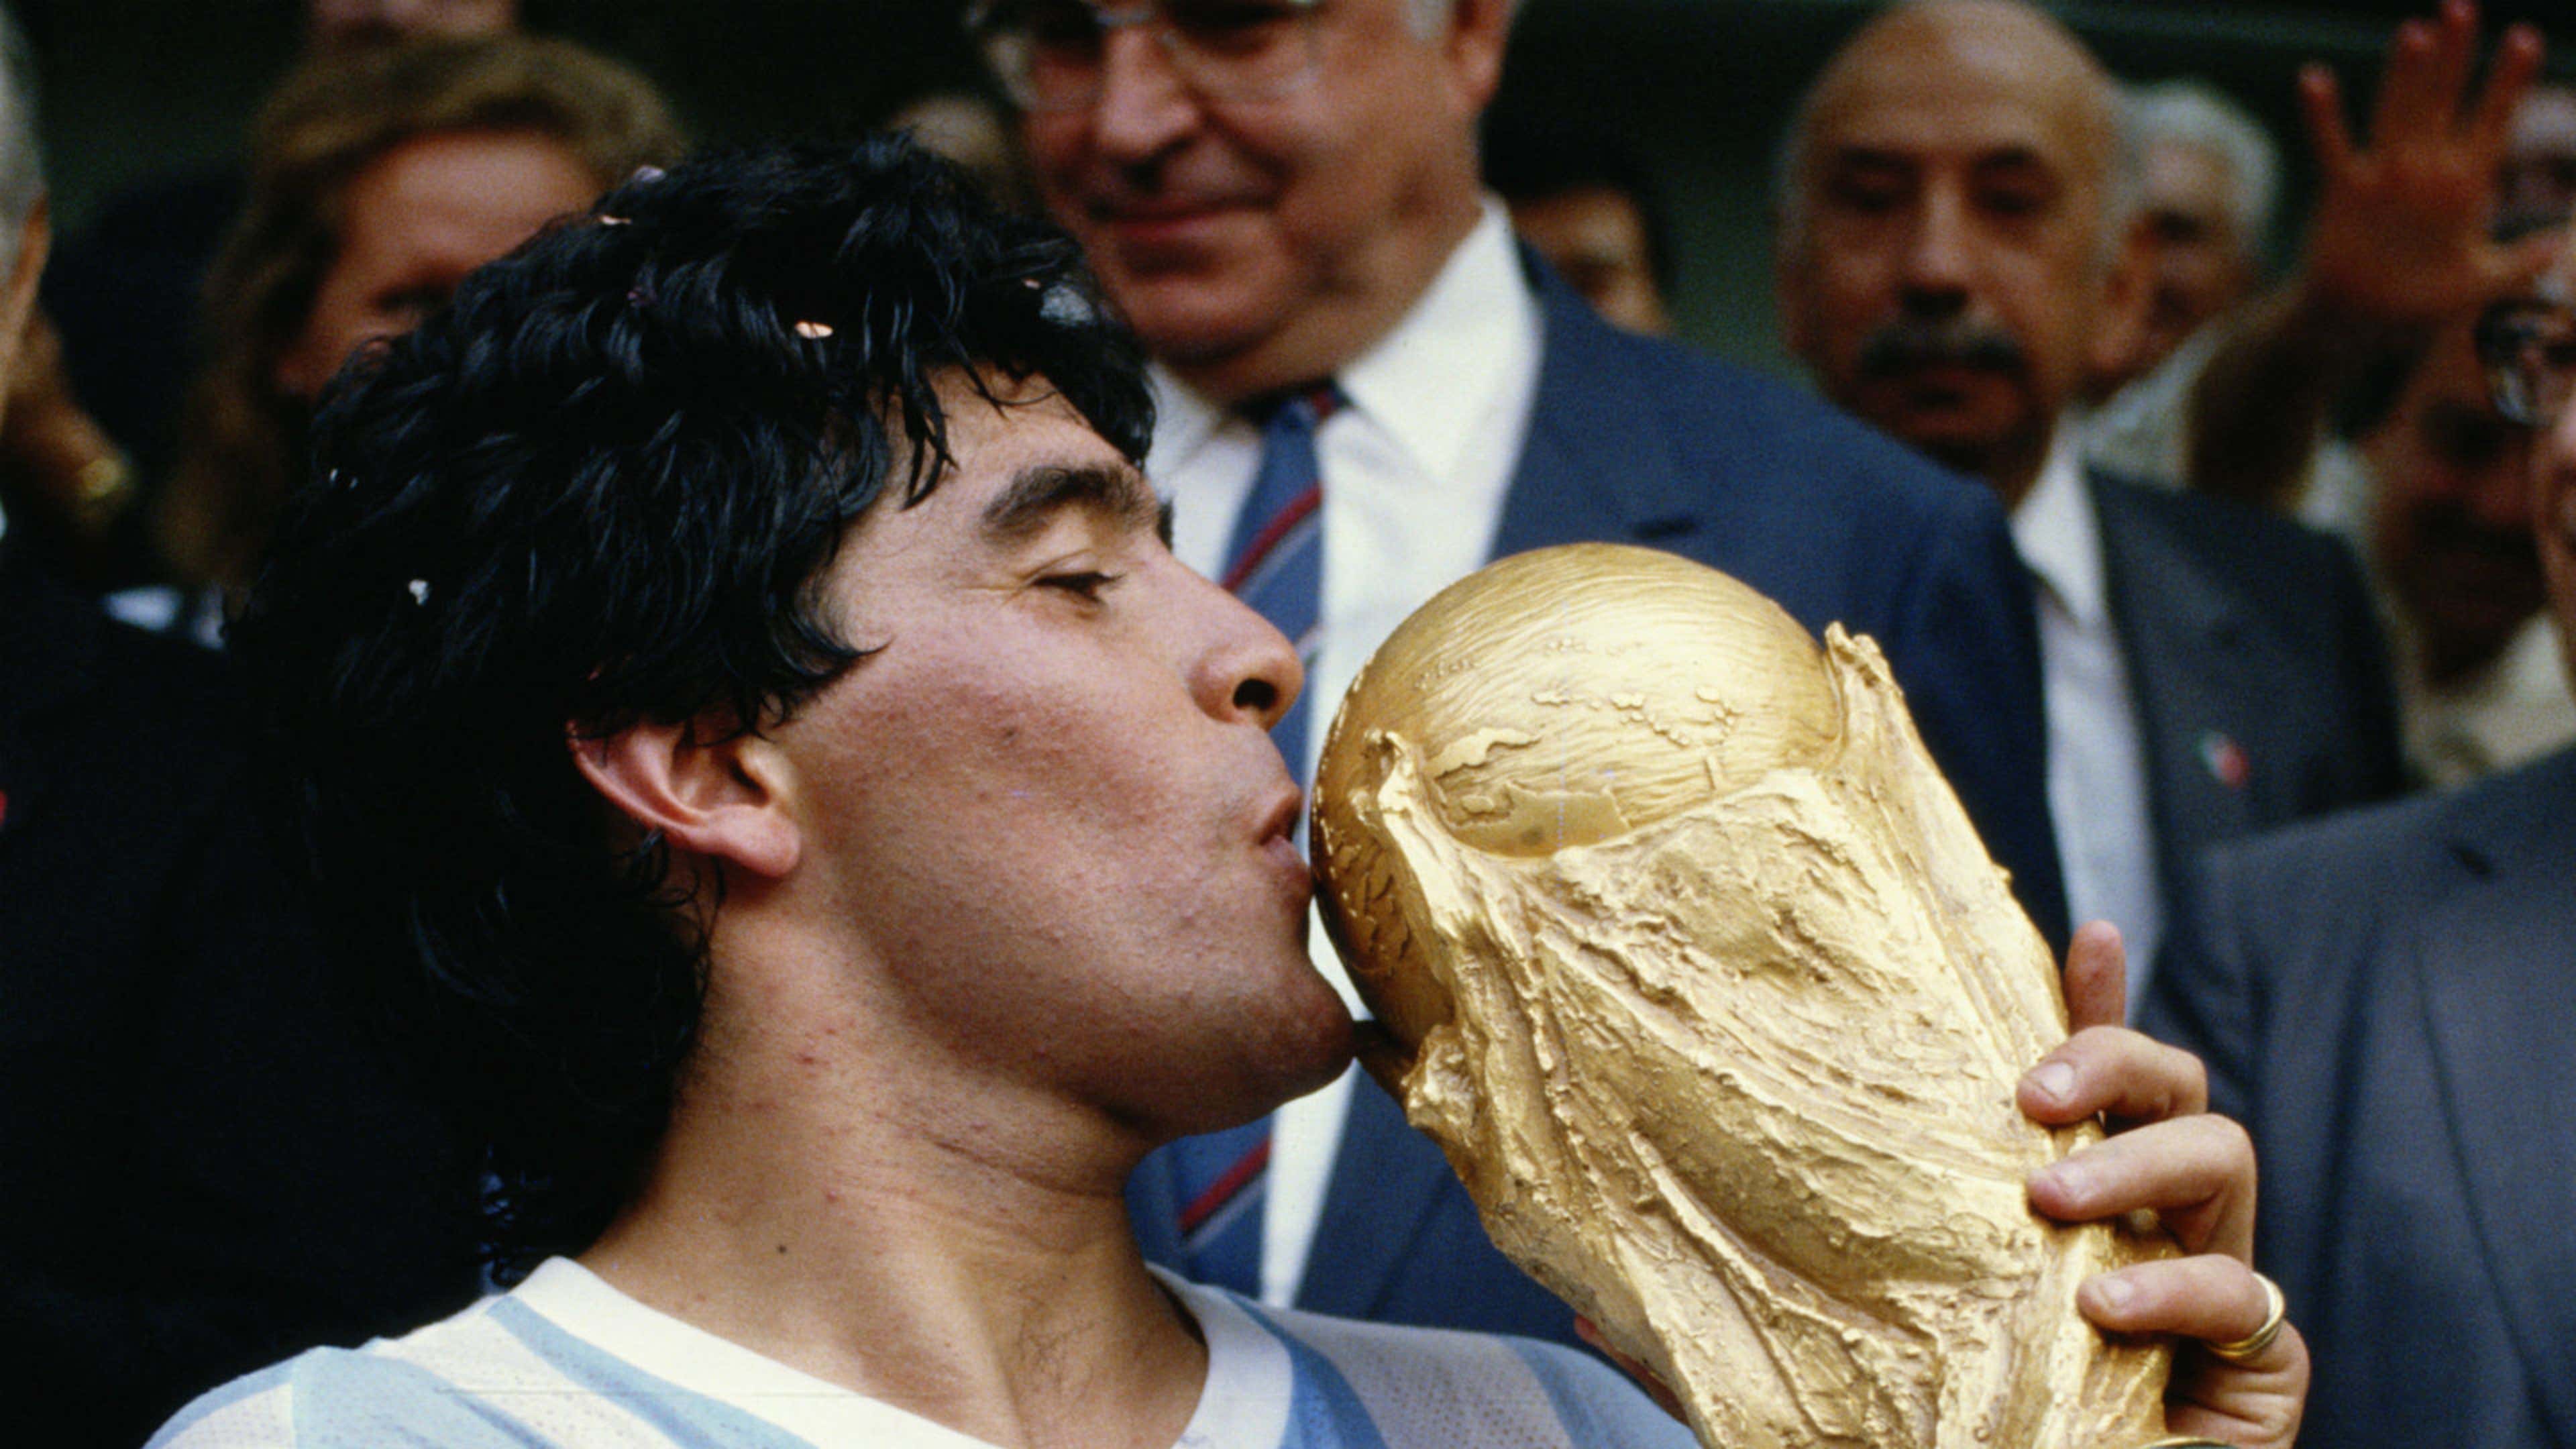 Who has won the most World Cups? List of winners all-time in men's